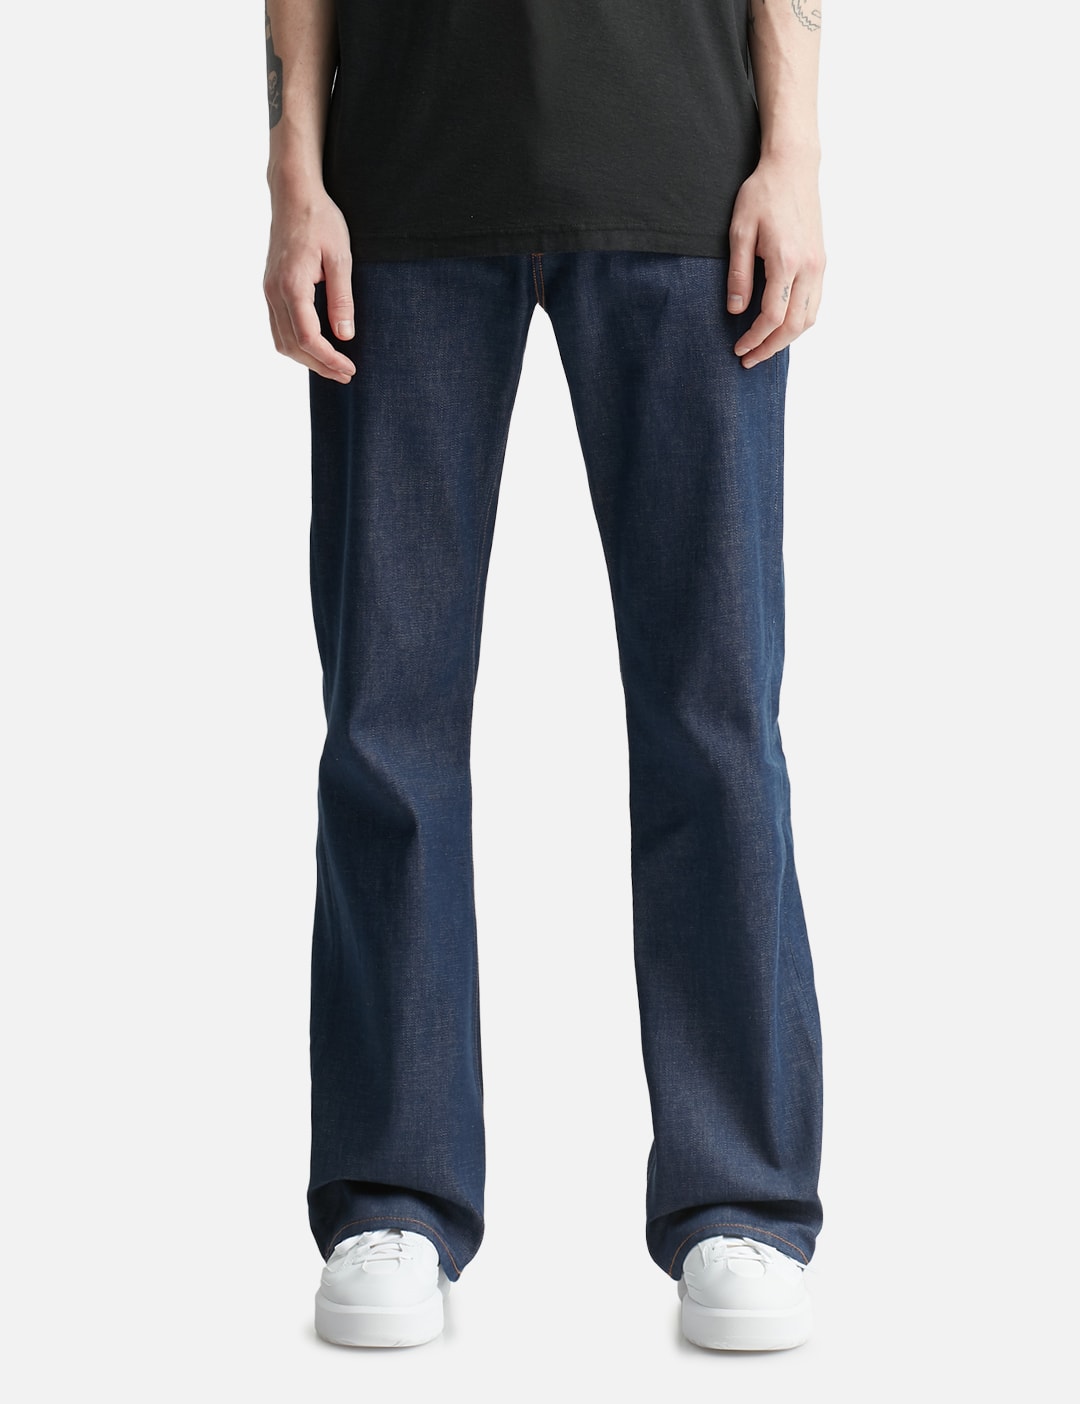 Acne Studios - Regular Fit Jeans 1992 | HBX - Globally Curated Fashion ...